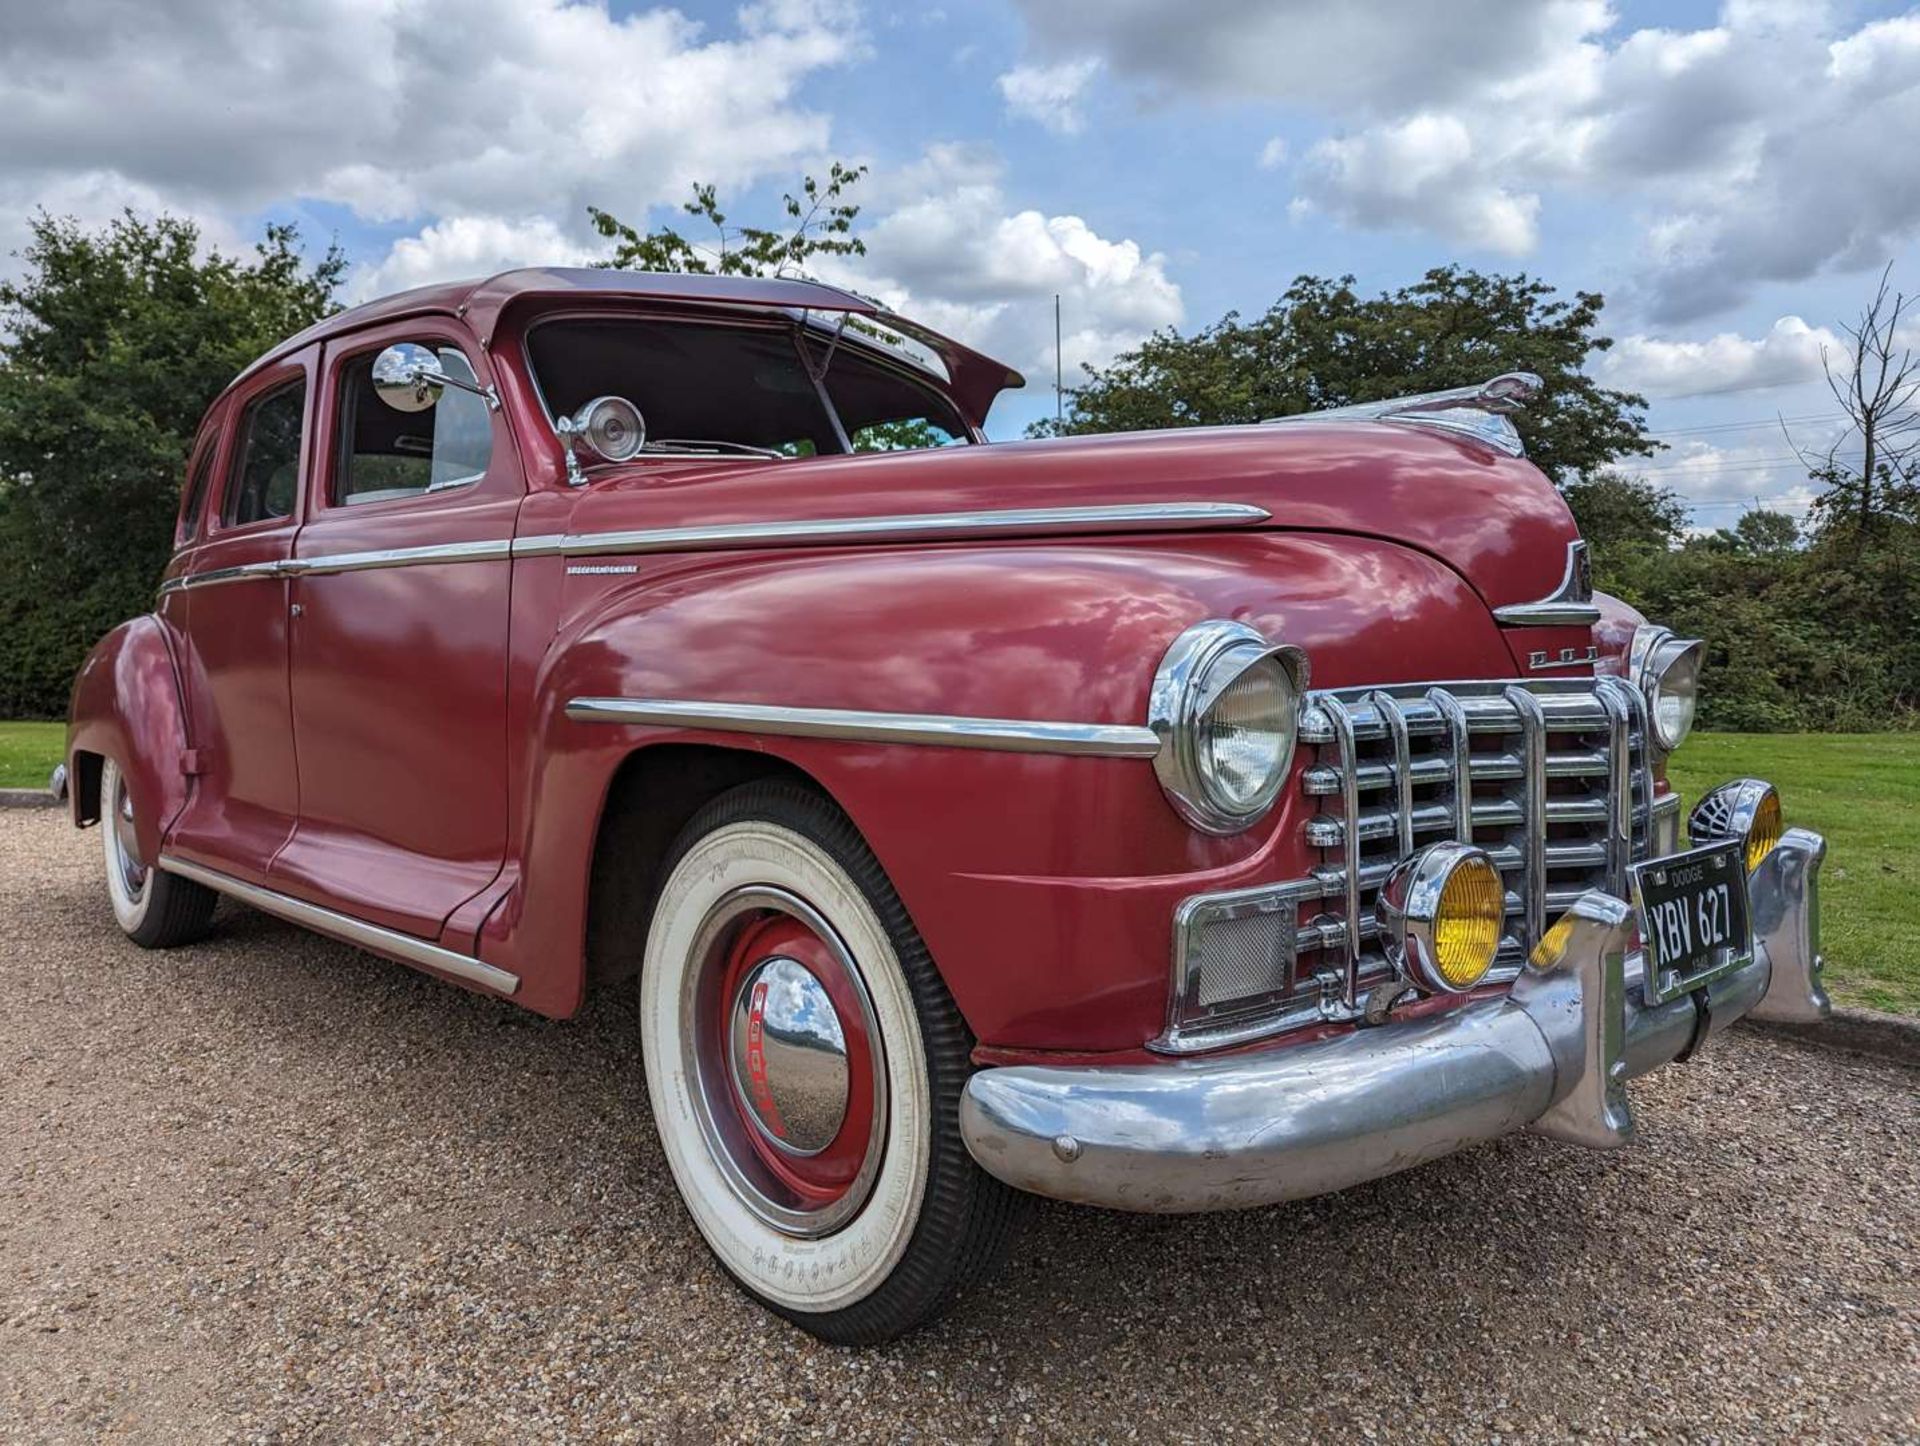 1947 DODGE SPECIAL DELUXE LHD - Image 9 of 30